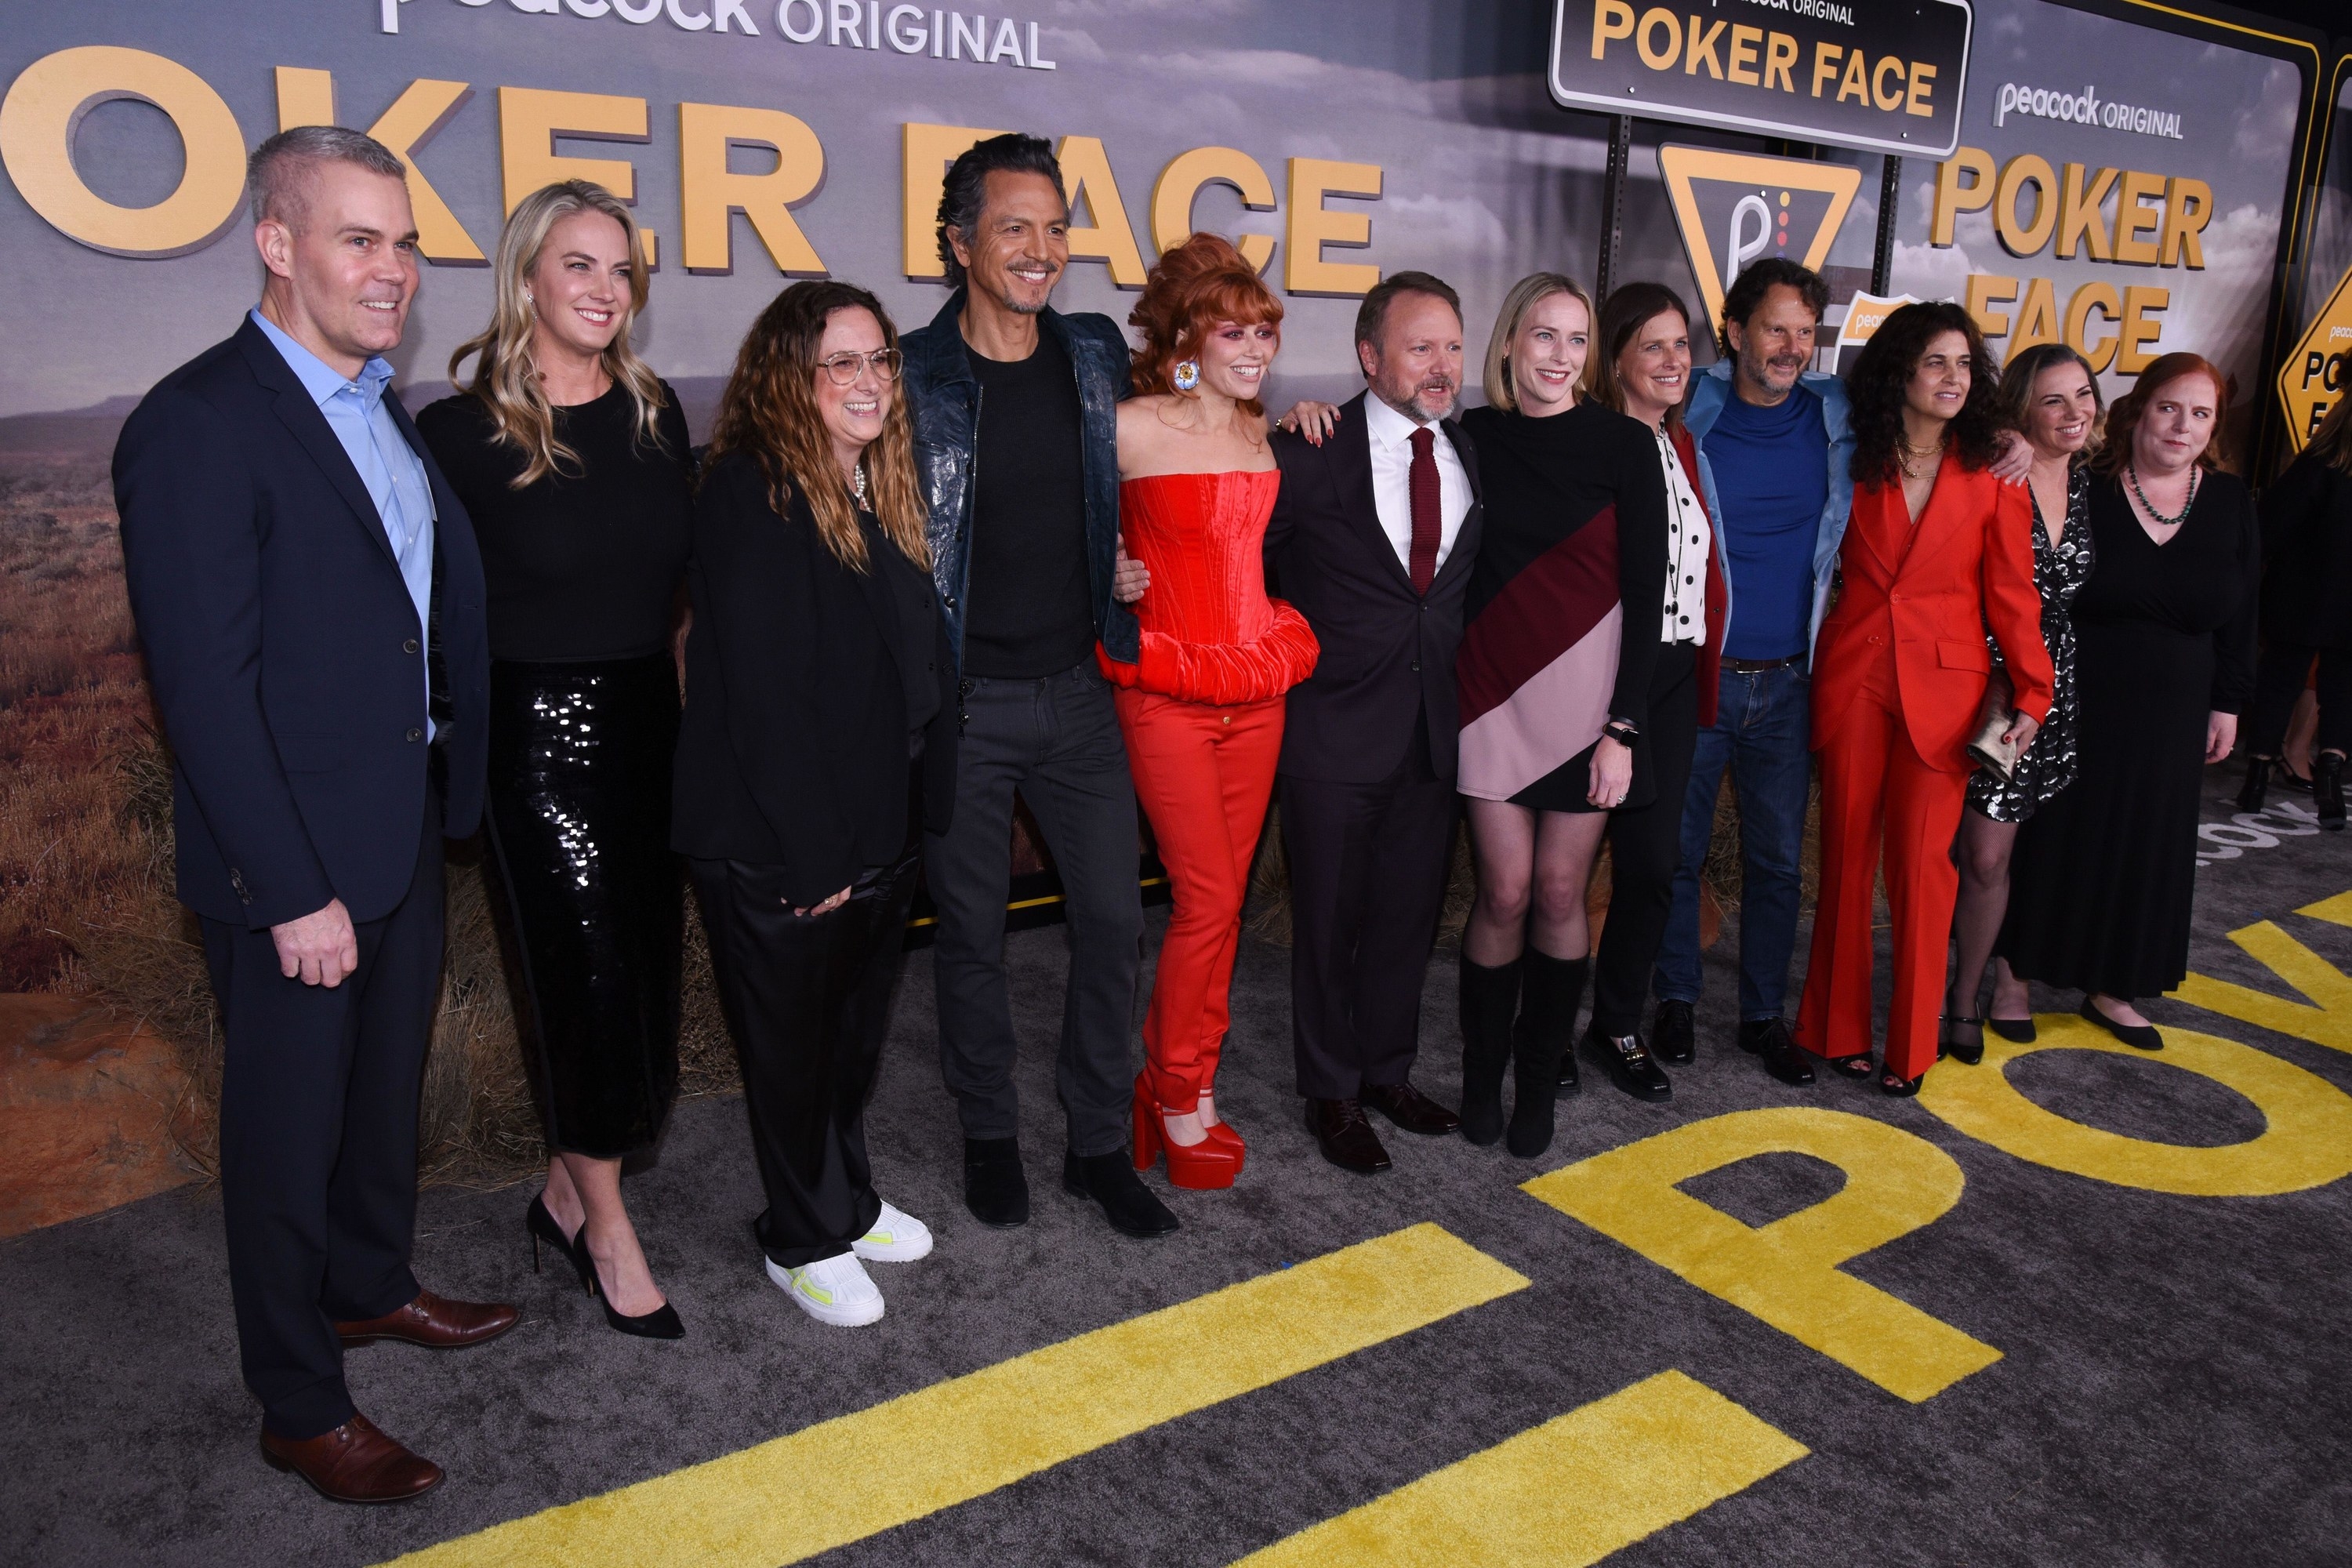 Poker Face Review: A Must-See Peacock Murder Mystery Show